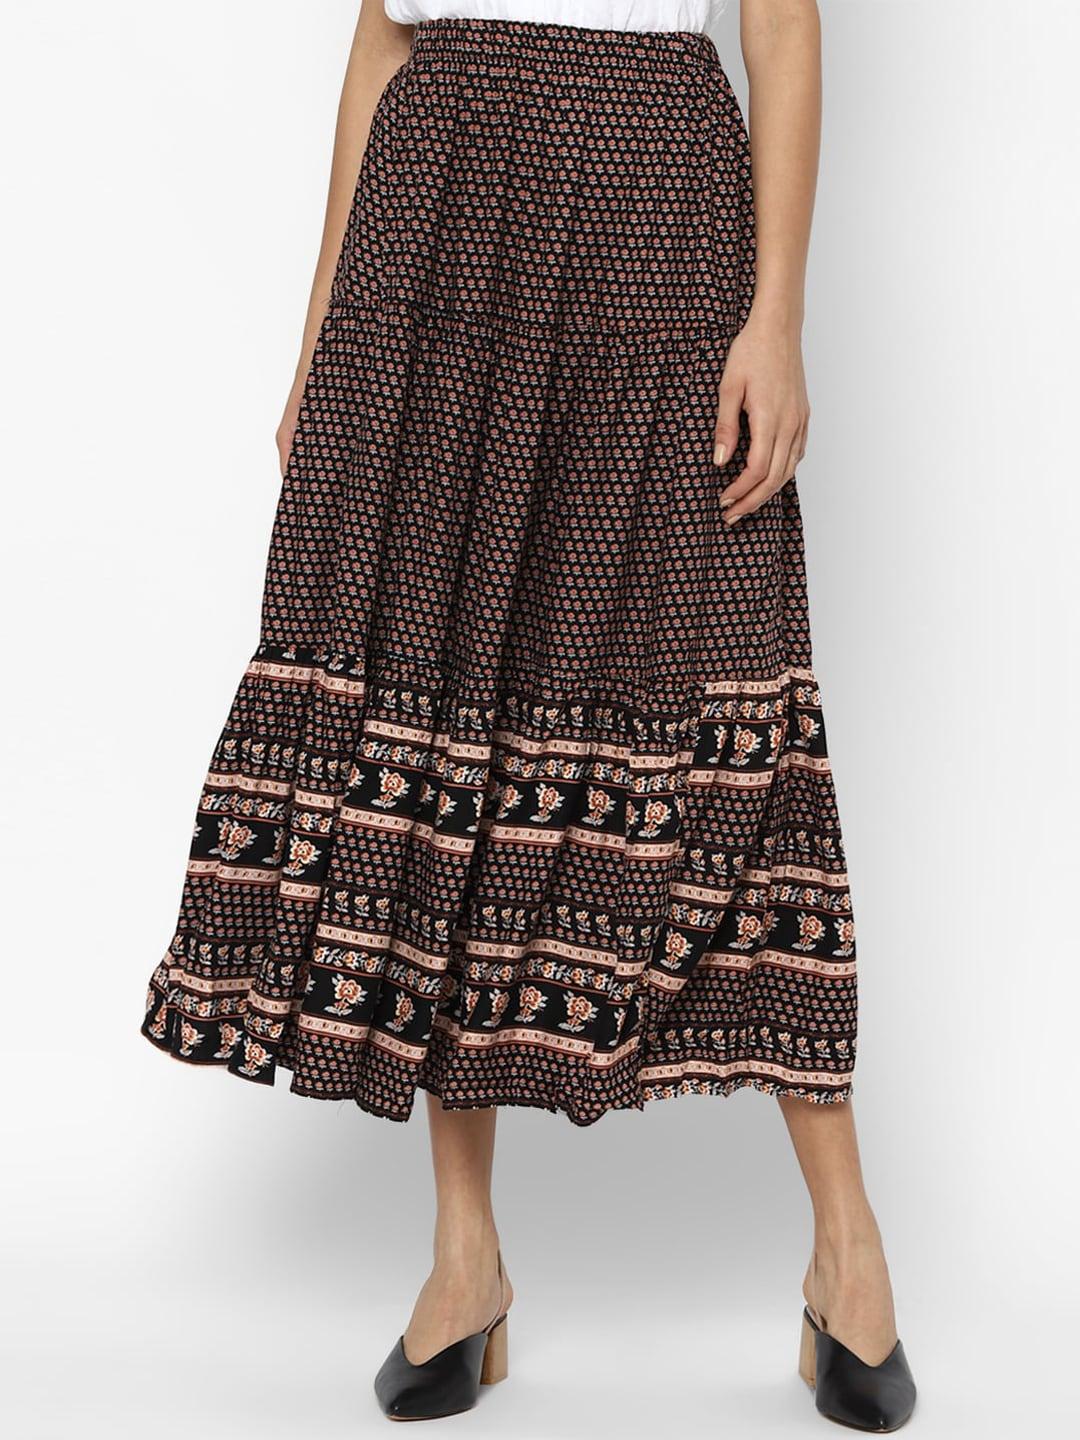 AMERICAN EAGLE OUTFITTERS Women Black & Peach-Colored Printed Flared Midi Skirt